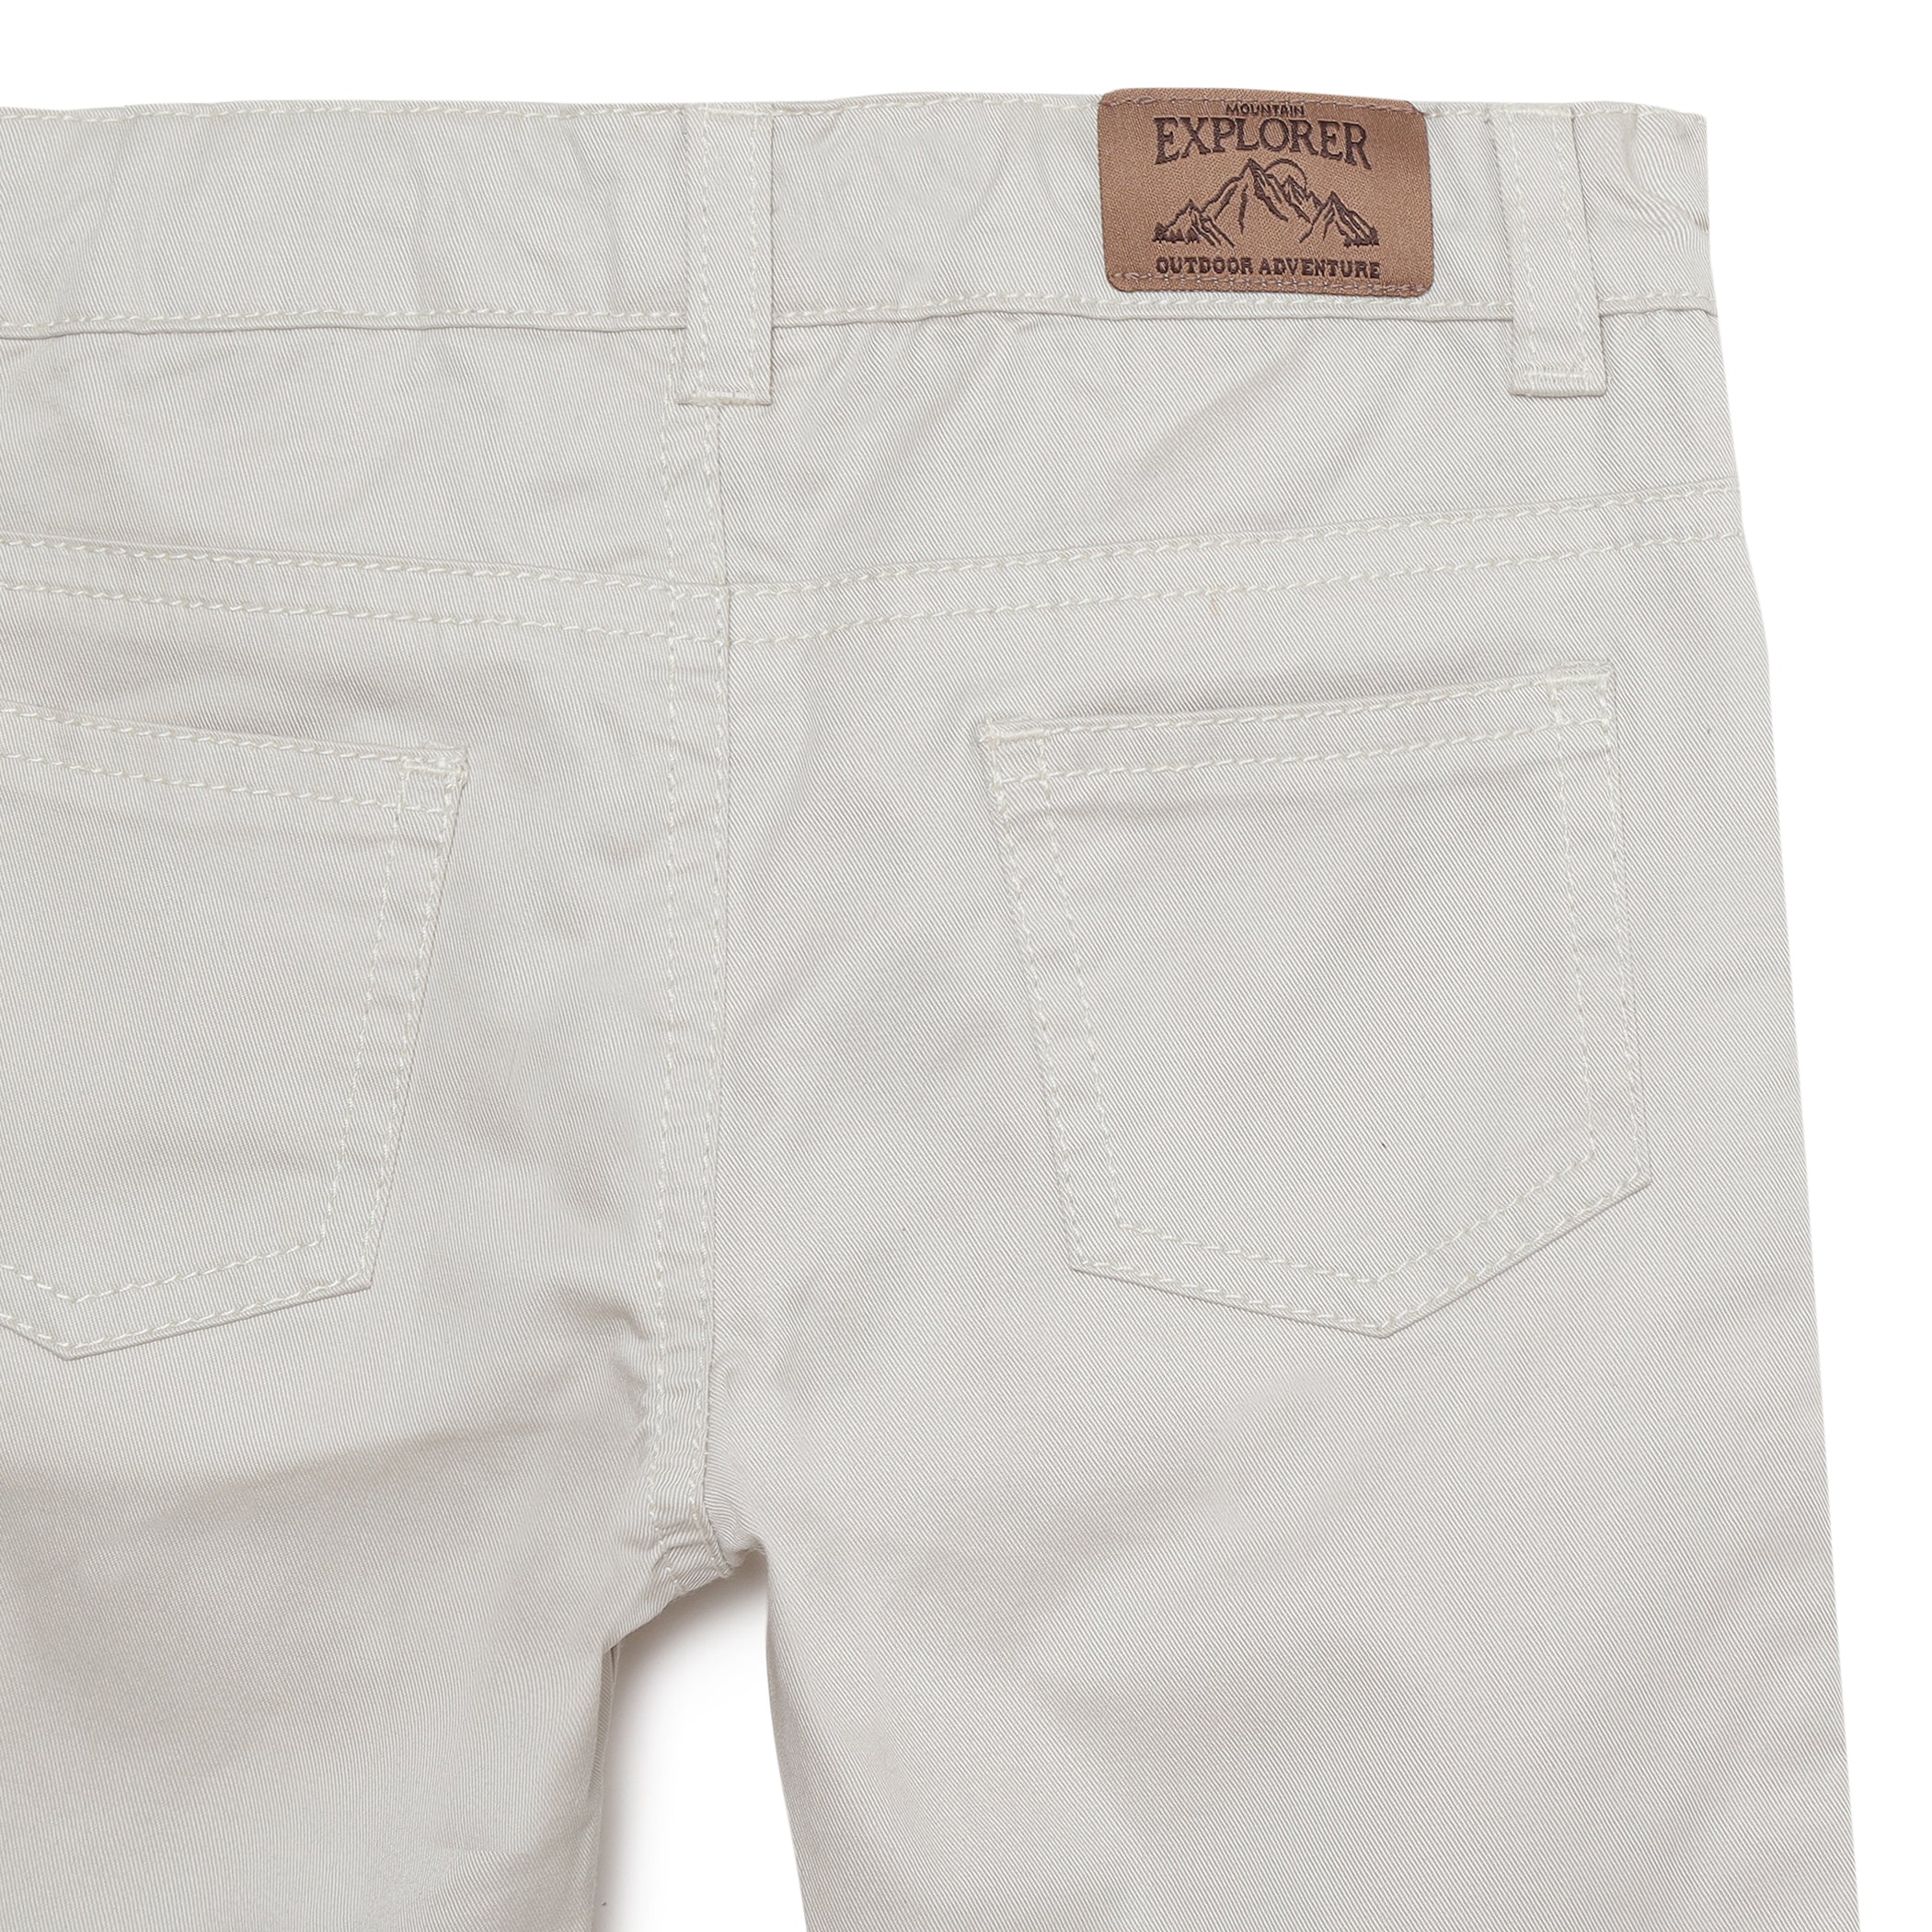 Baby Boys Solid Twill Pant